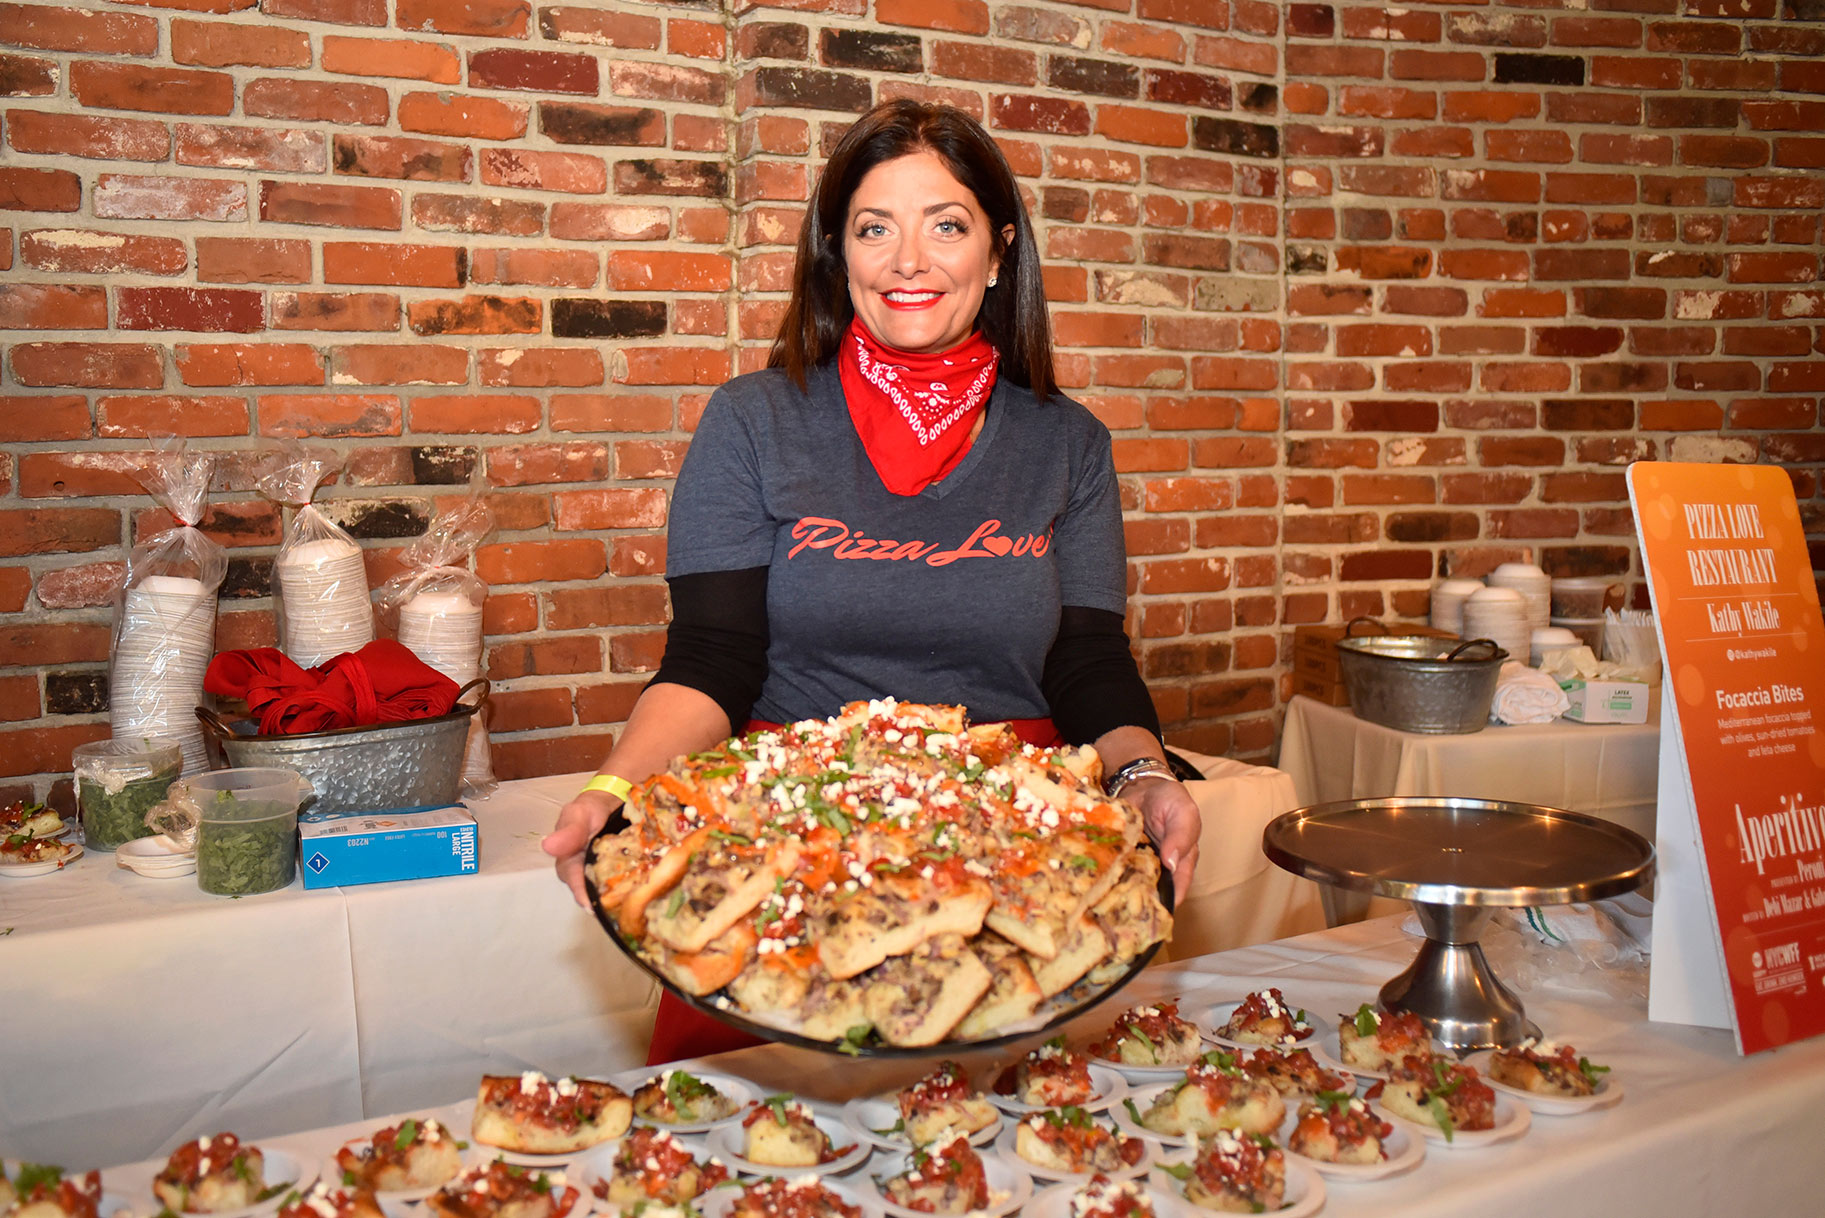 Get All the Details on Kathy Wakile’s Restaurant & Cannoli Business: “It’s Great” | Bravo TV Official Site